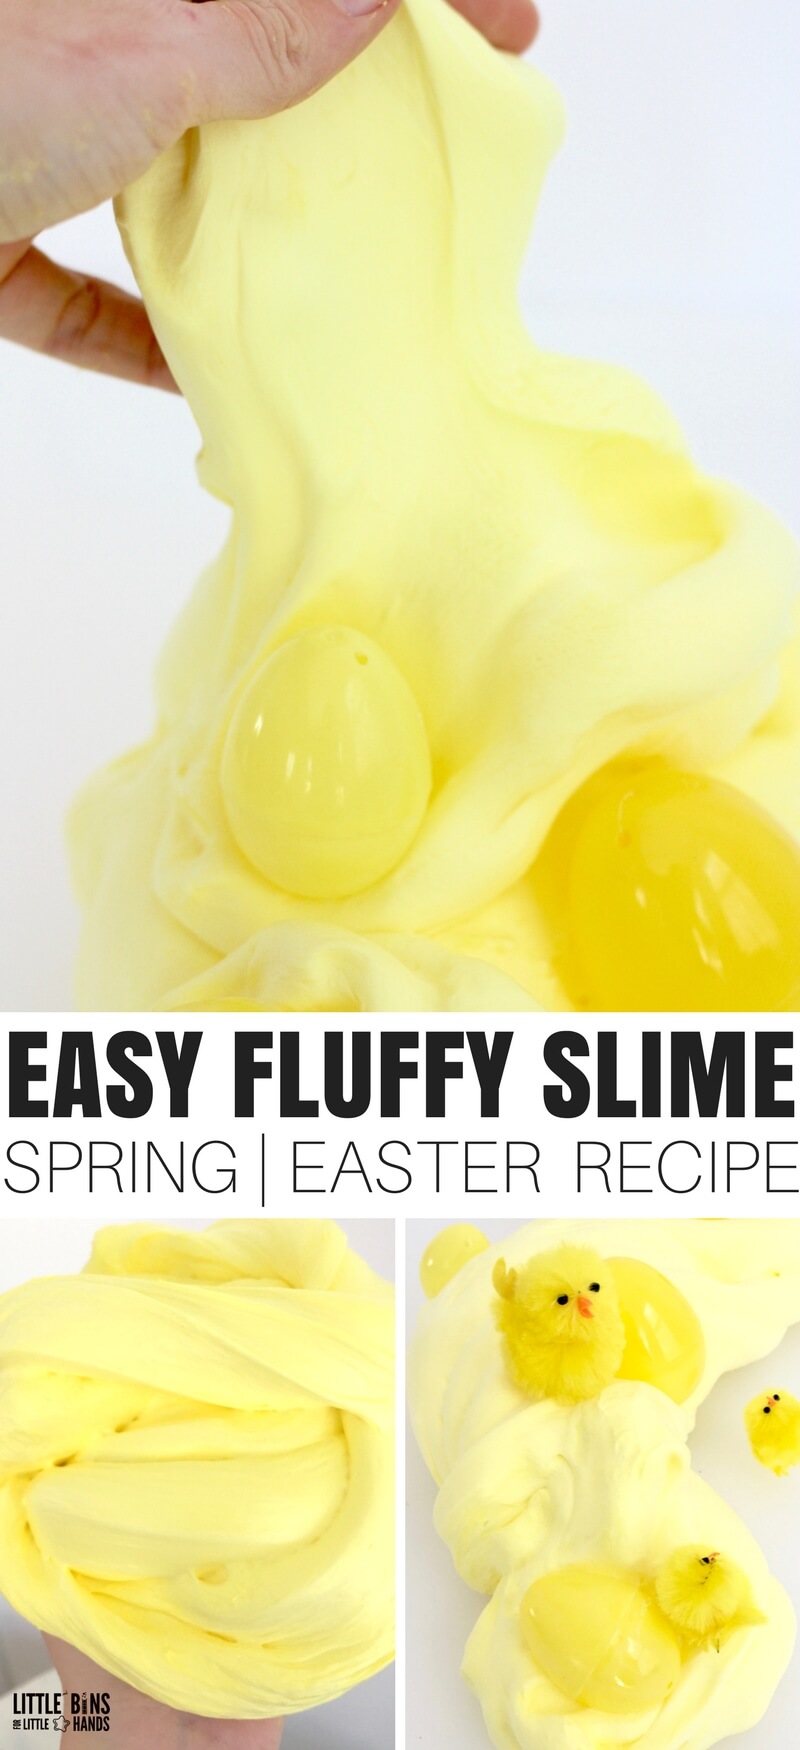 Easy Easter fluffy slime recipe for amazing homemade slime any time of the year. Making slime should be easy and fun and it is with our best slime recipes! Fluffy slime with shaving cream and saline solution is a hit with kids plus it's great science. Make our Fluffy Easter Slime for Easter science and Easter chemistry!